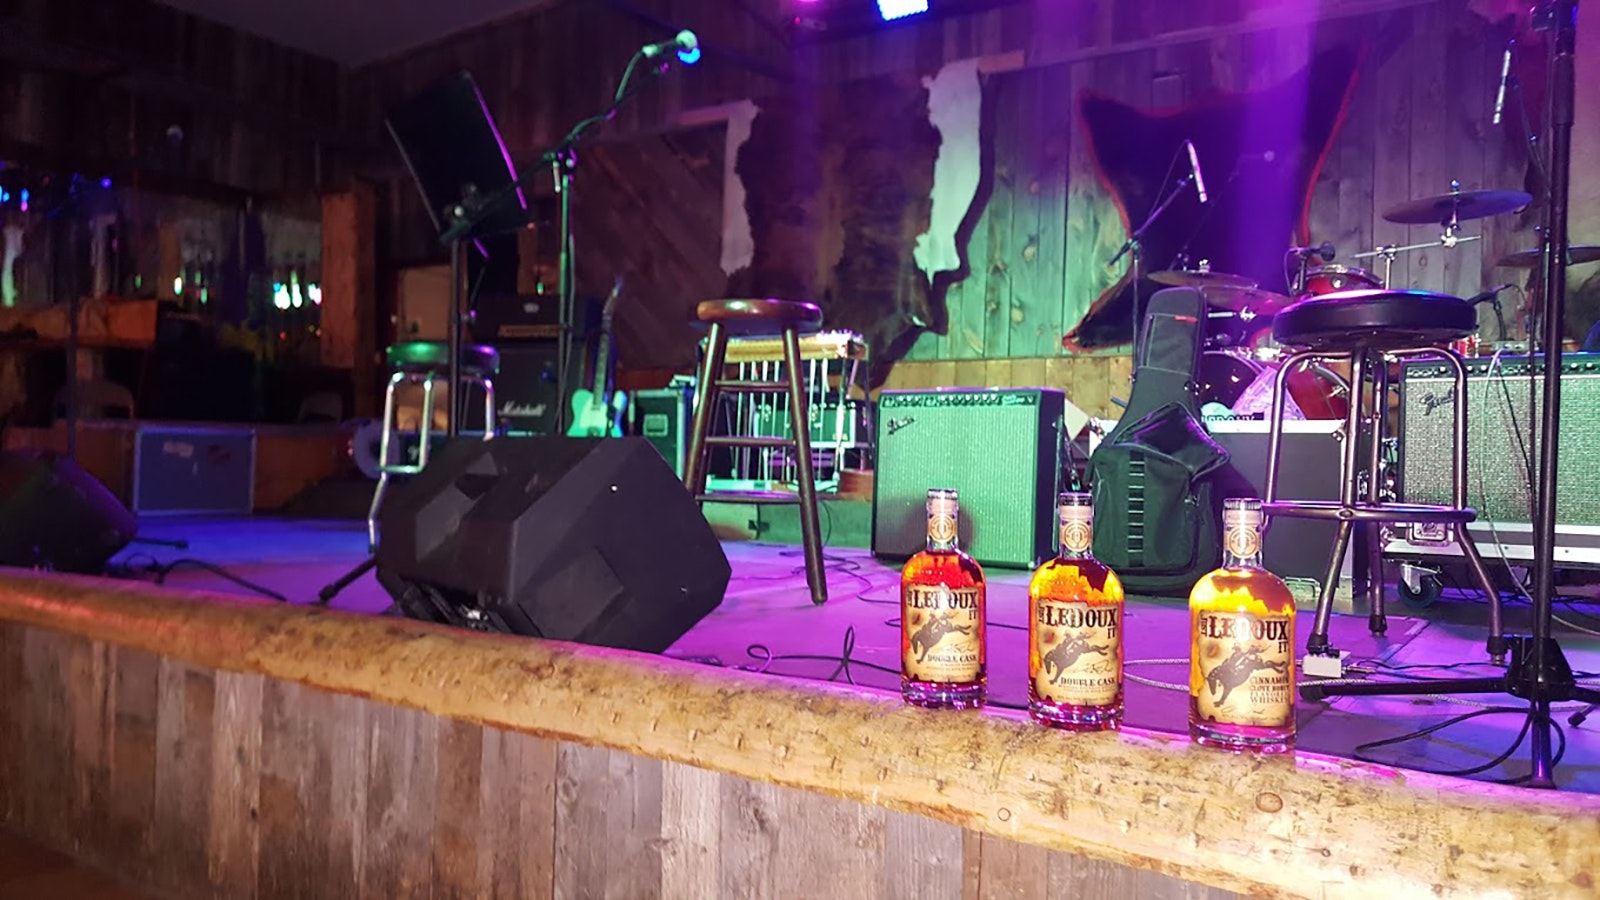 Bottles of Just Ledoux It whiskey on the edge of the stage at the Cowboy Saloon & Dance Hall.